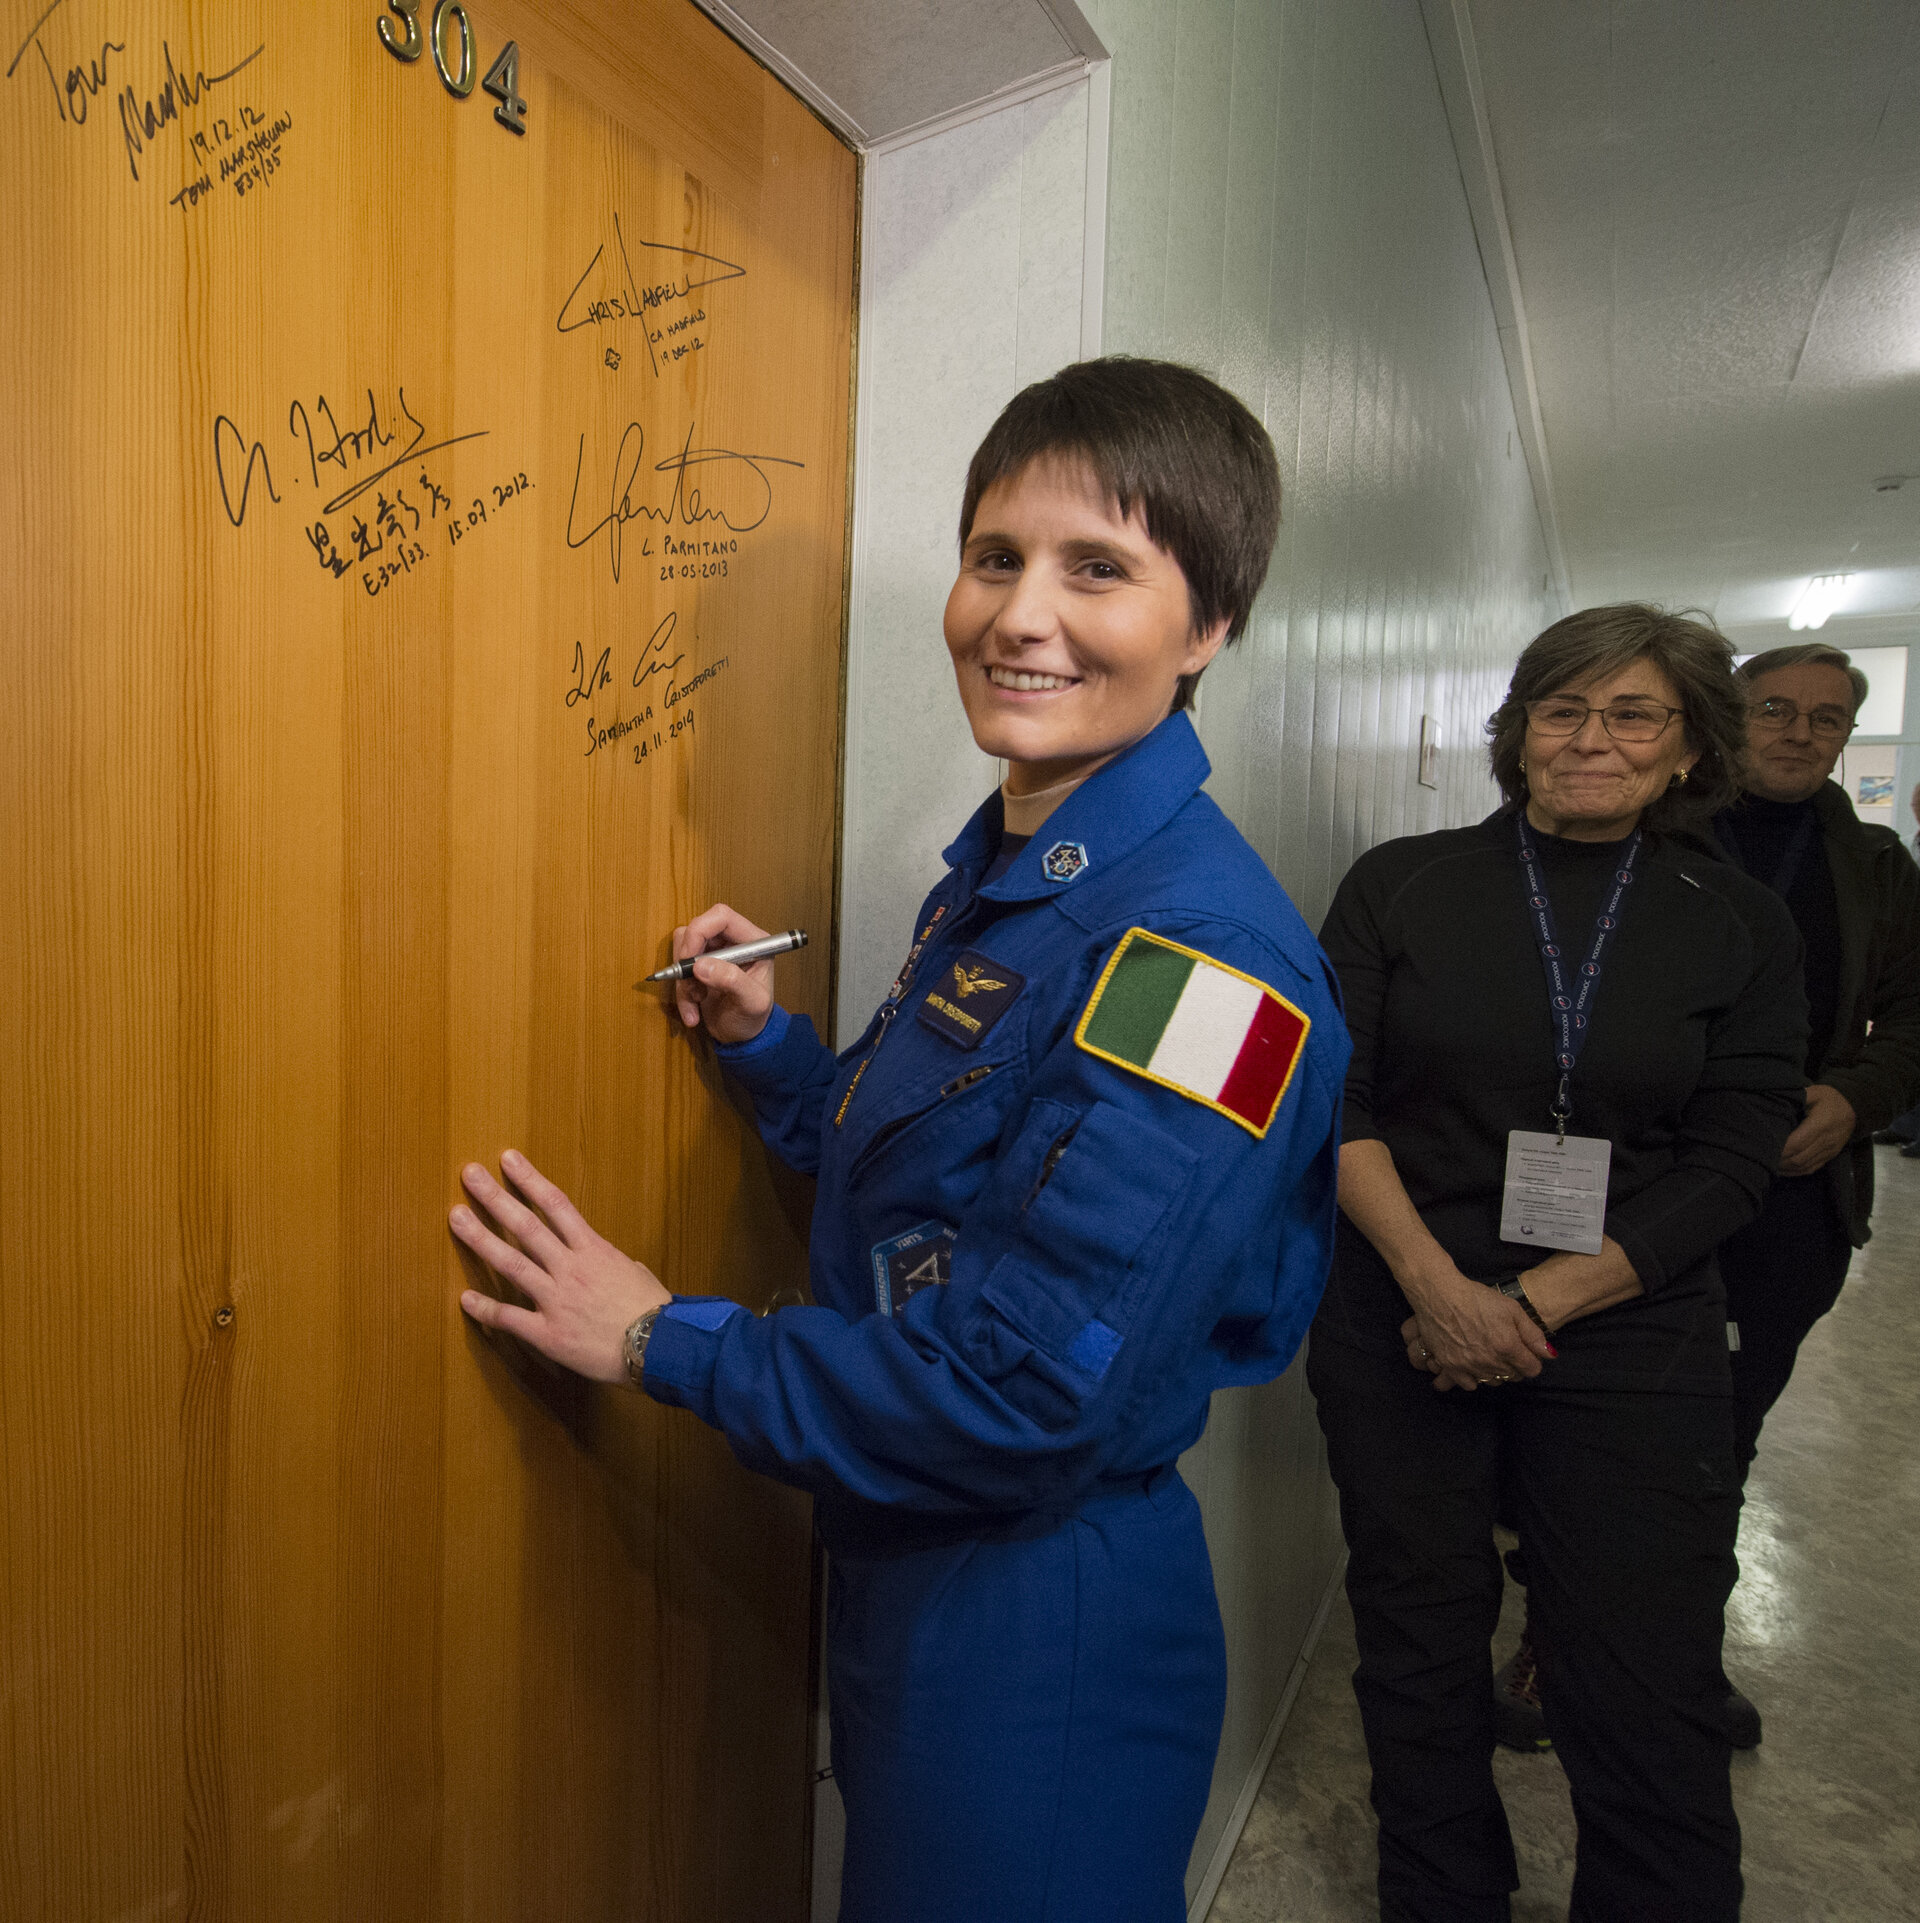 Samantha Cristoforetti performs the traditional door signing